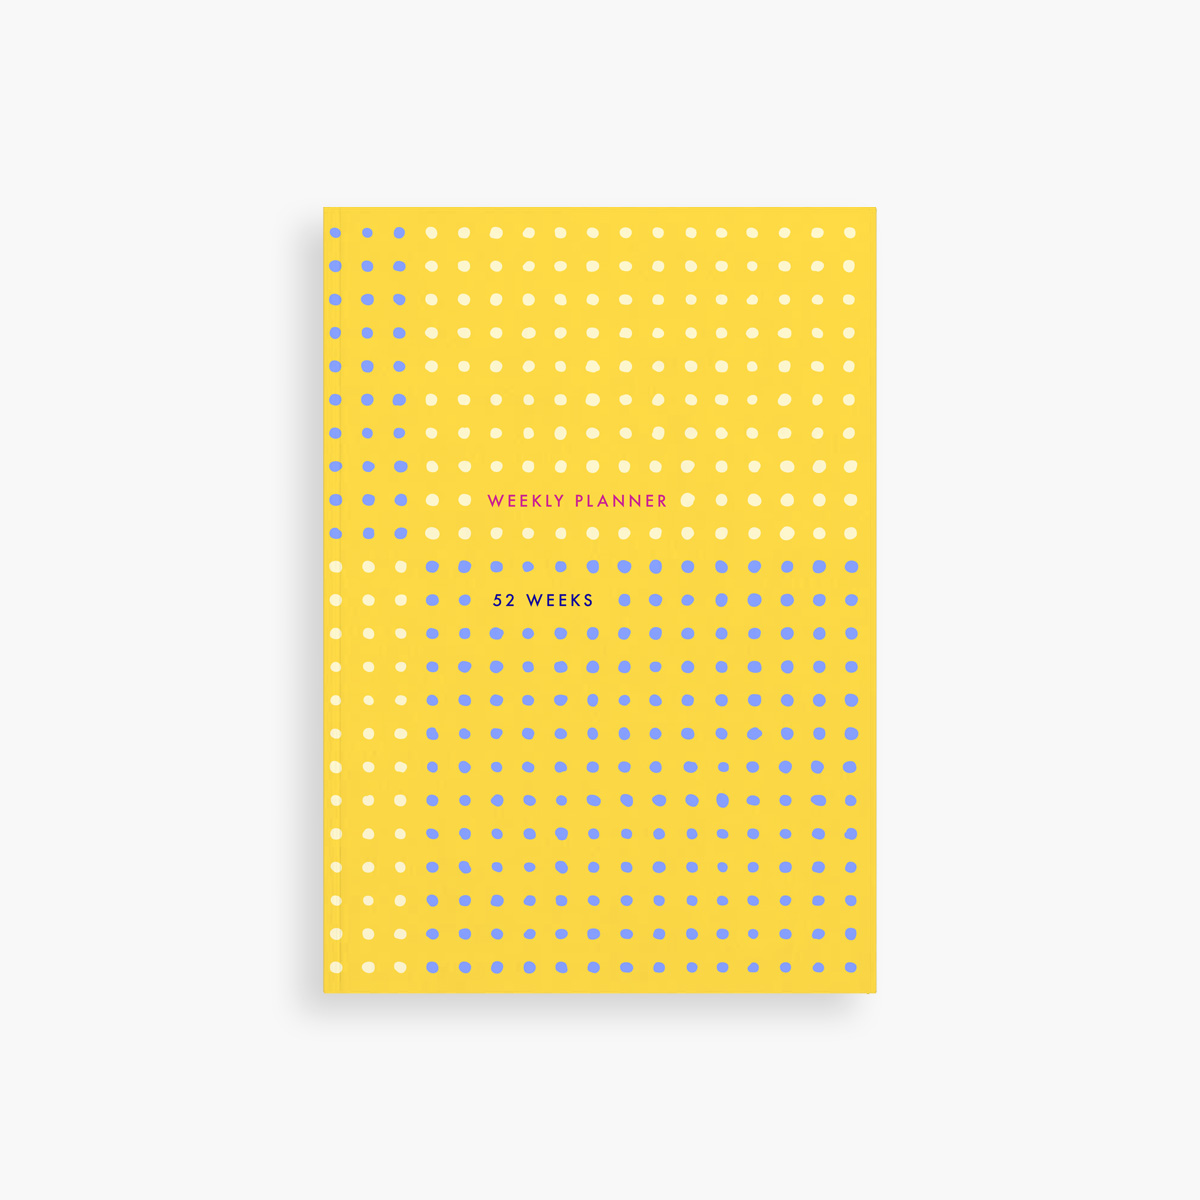 Essential Weekly Planner – undated (yellow)